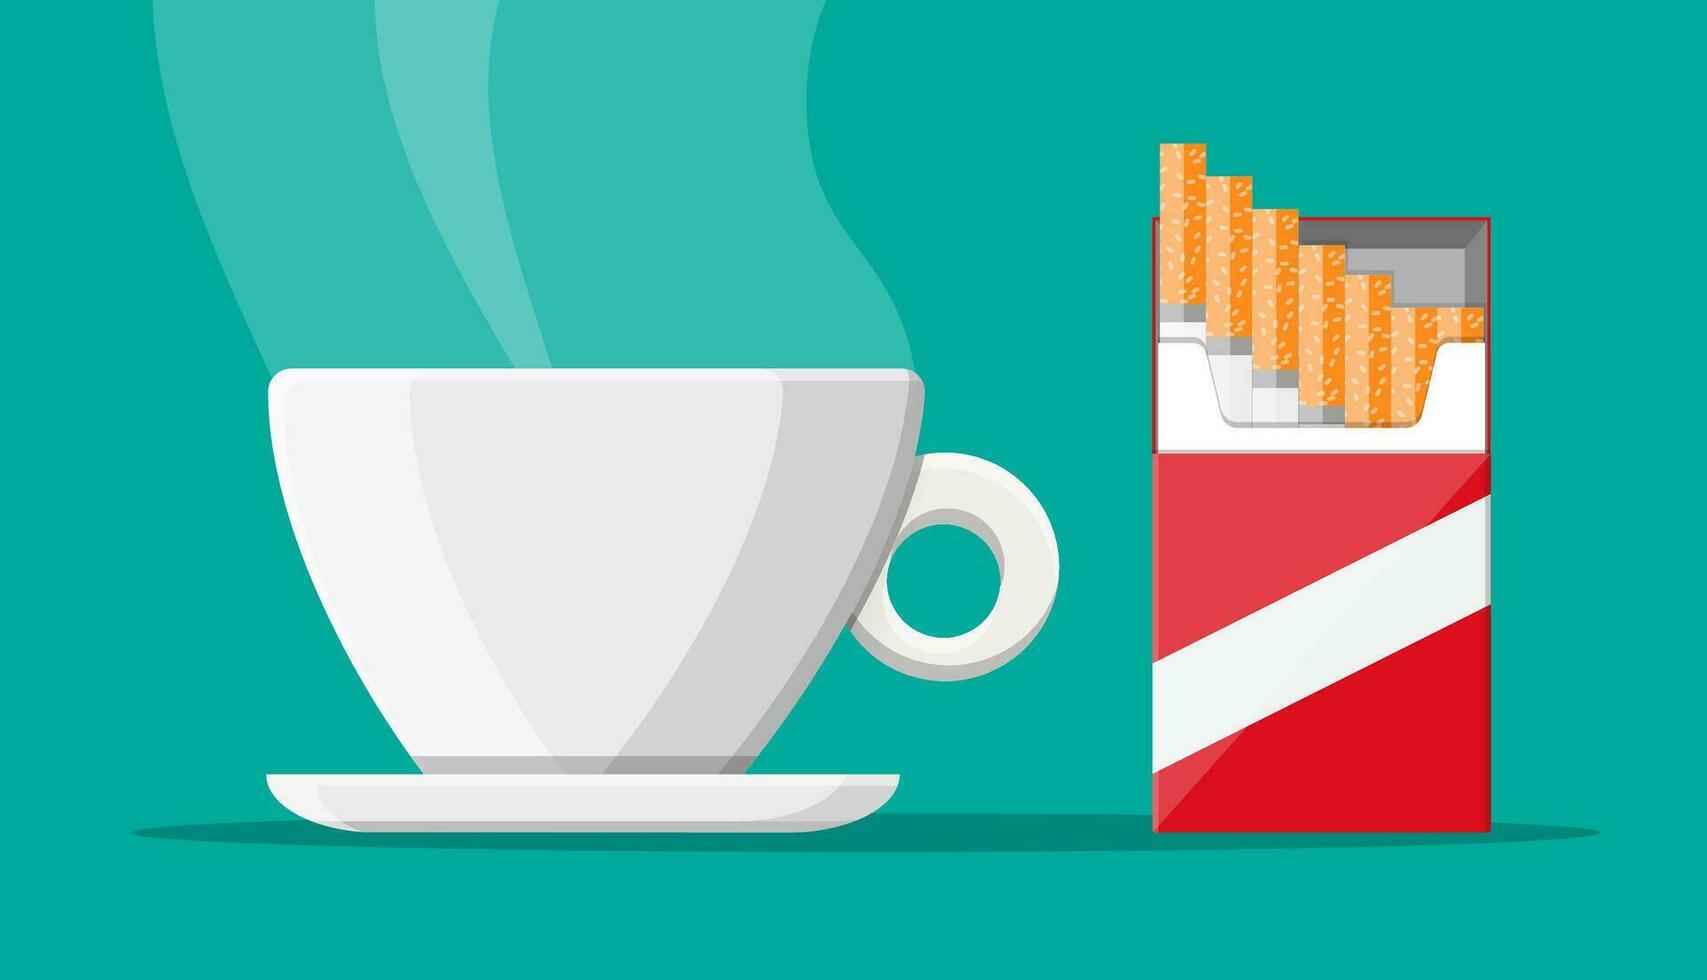 Coffee cup and package of cigarettes. Unhealthy lifestyle. Breakfast and morning. Vector illustration in flat style